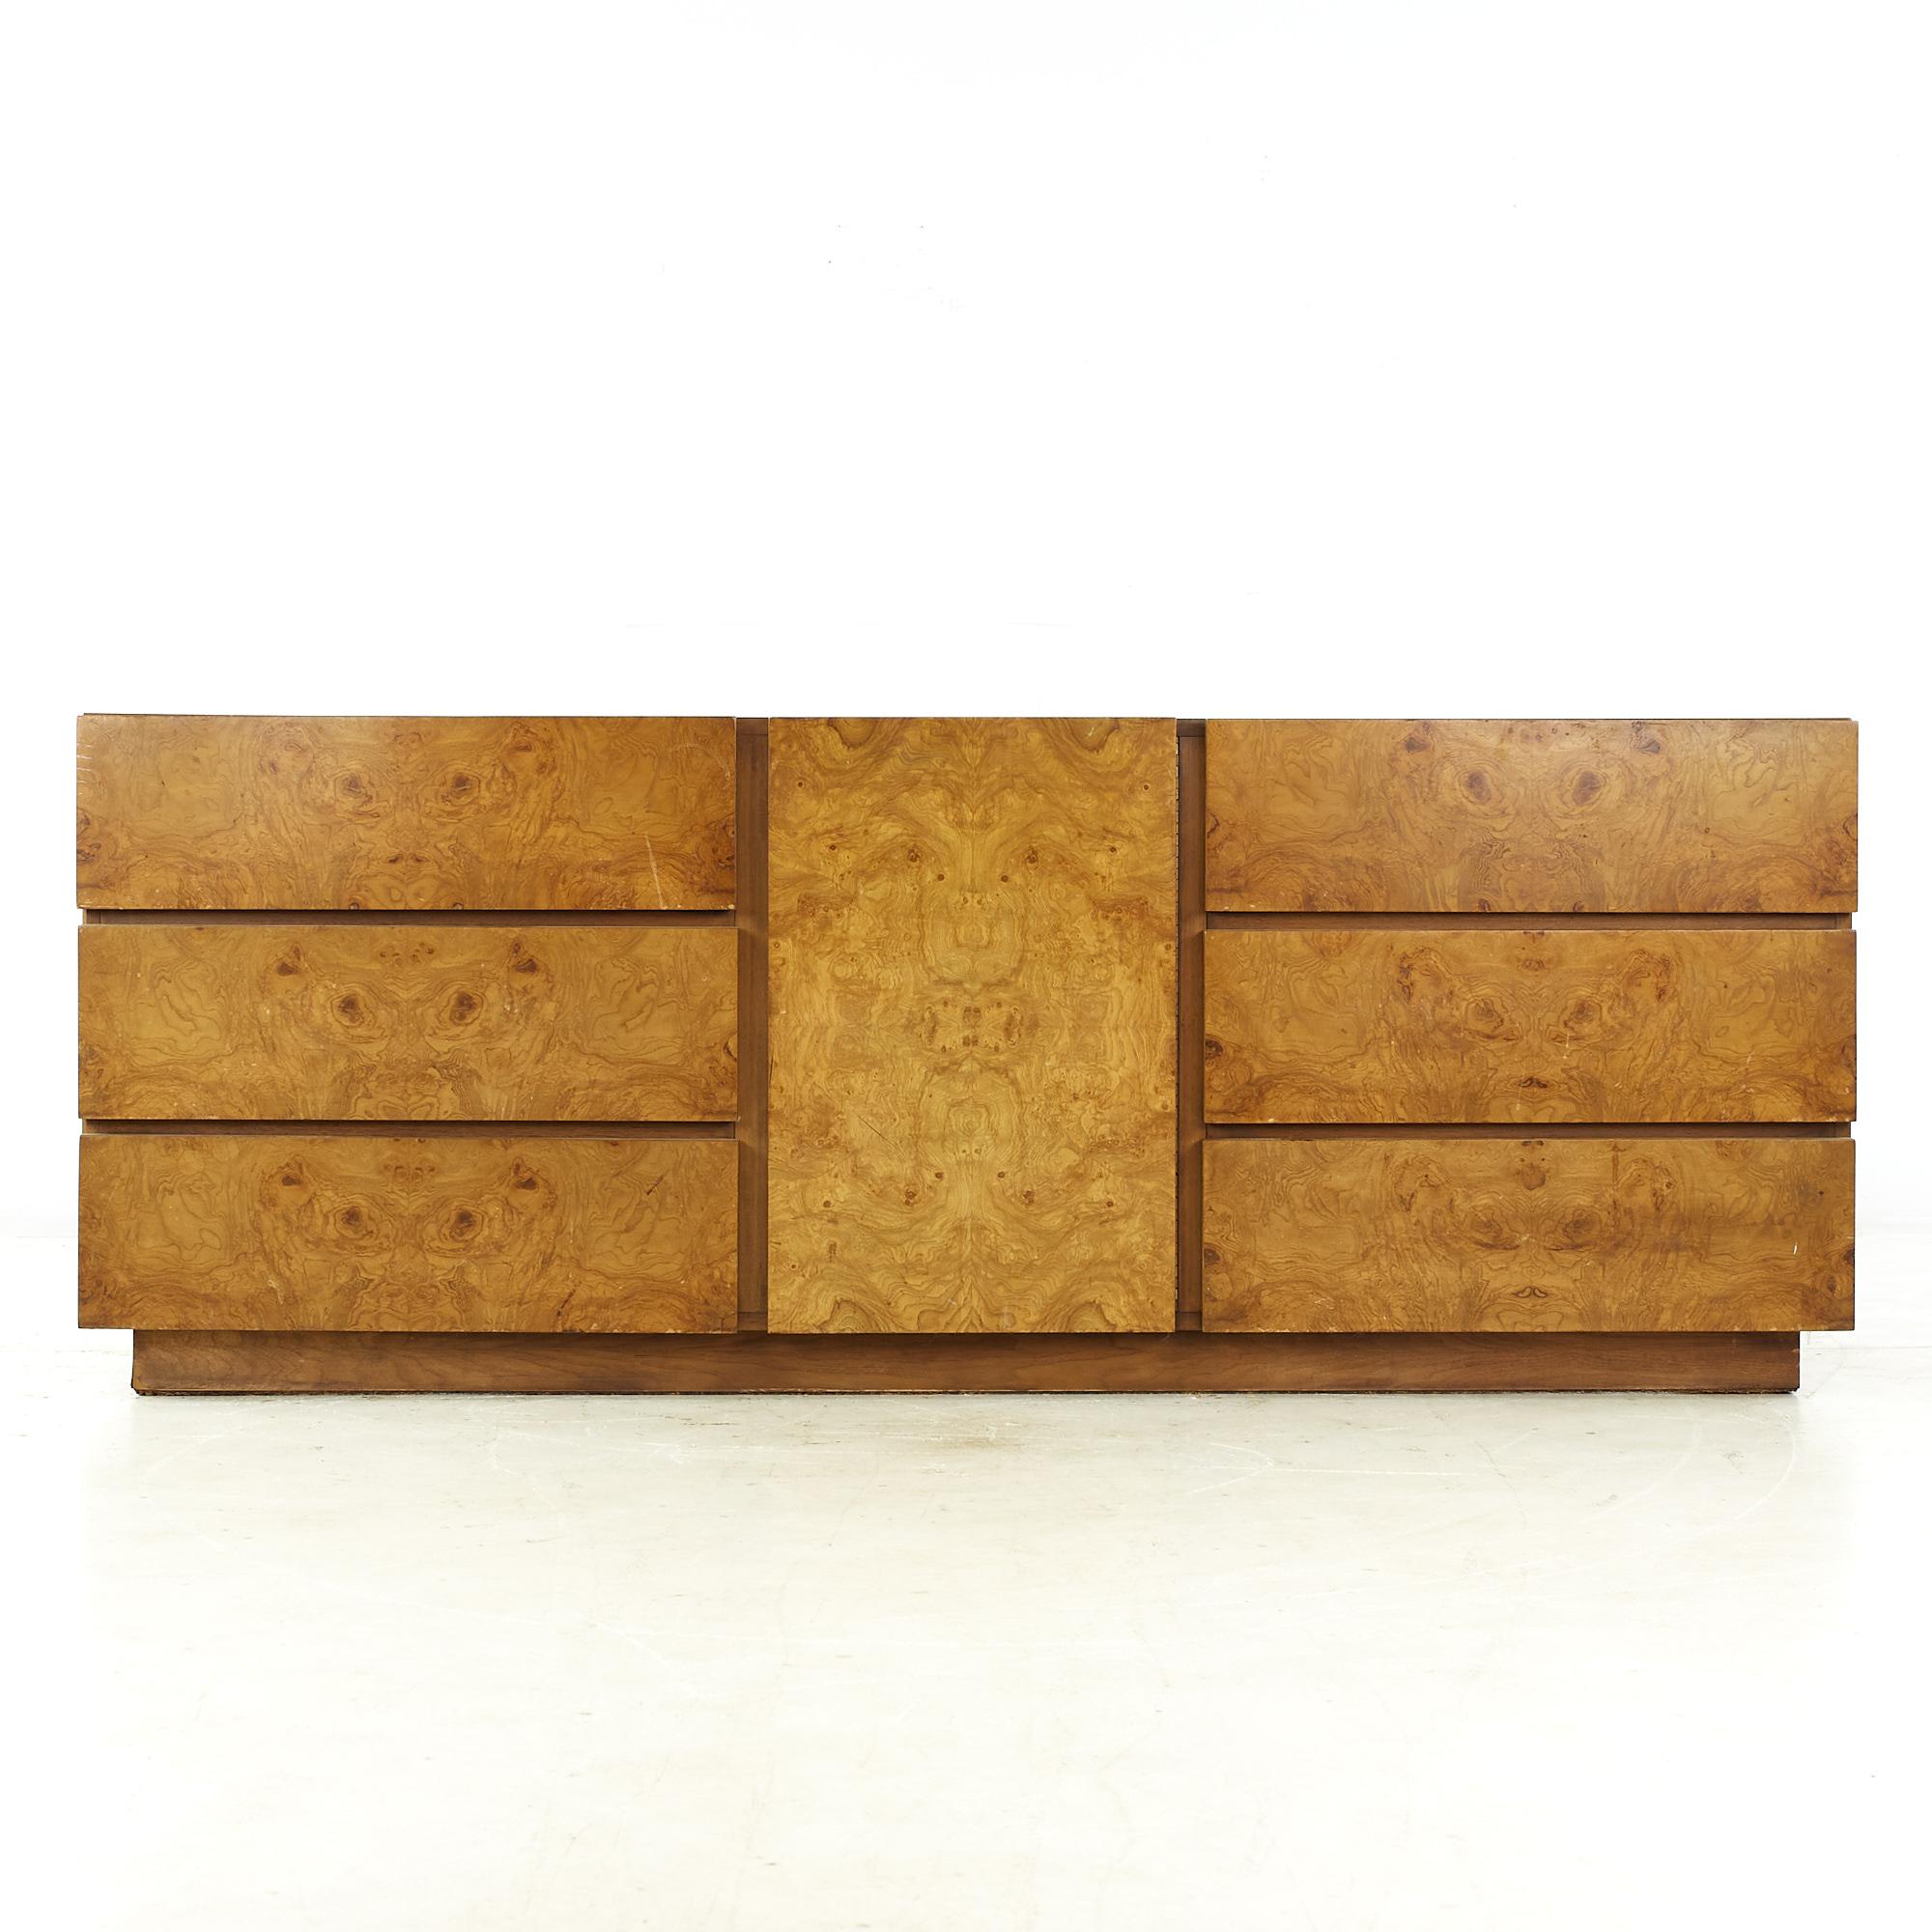 Lane Mid Century Burlwood Lowboy 9 Drawer Dresser

This dresser measures: 78 wide x 18 deep x 30.25 inches high

All pieces of furniture can be had in what we call restored vintage condition. That means the piece is restored upon purchase so it’s